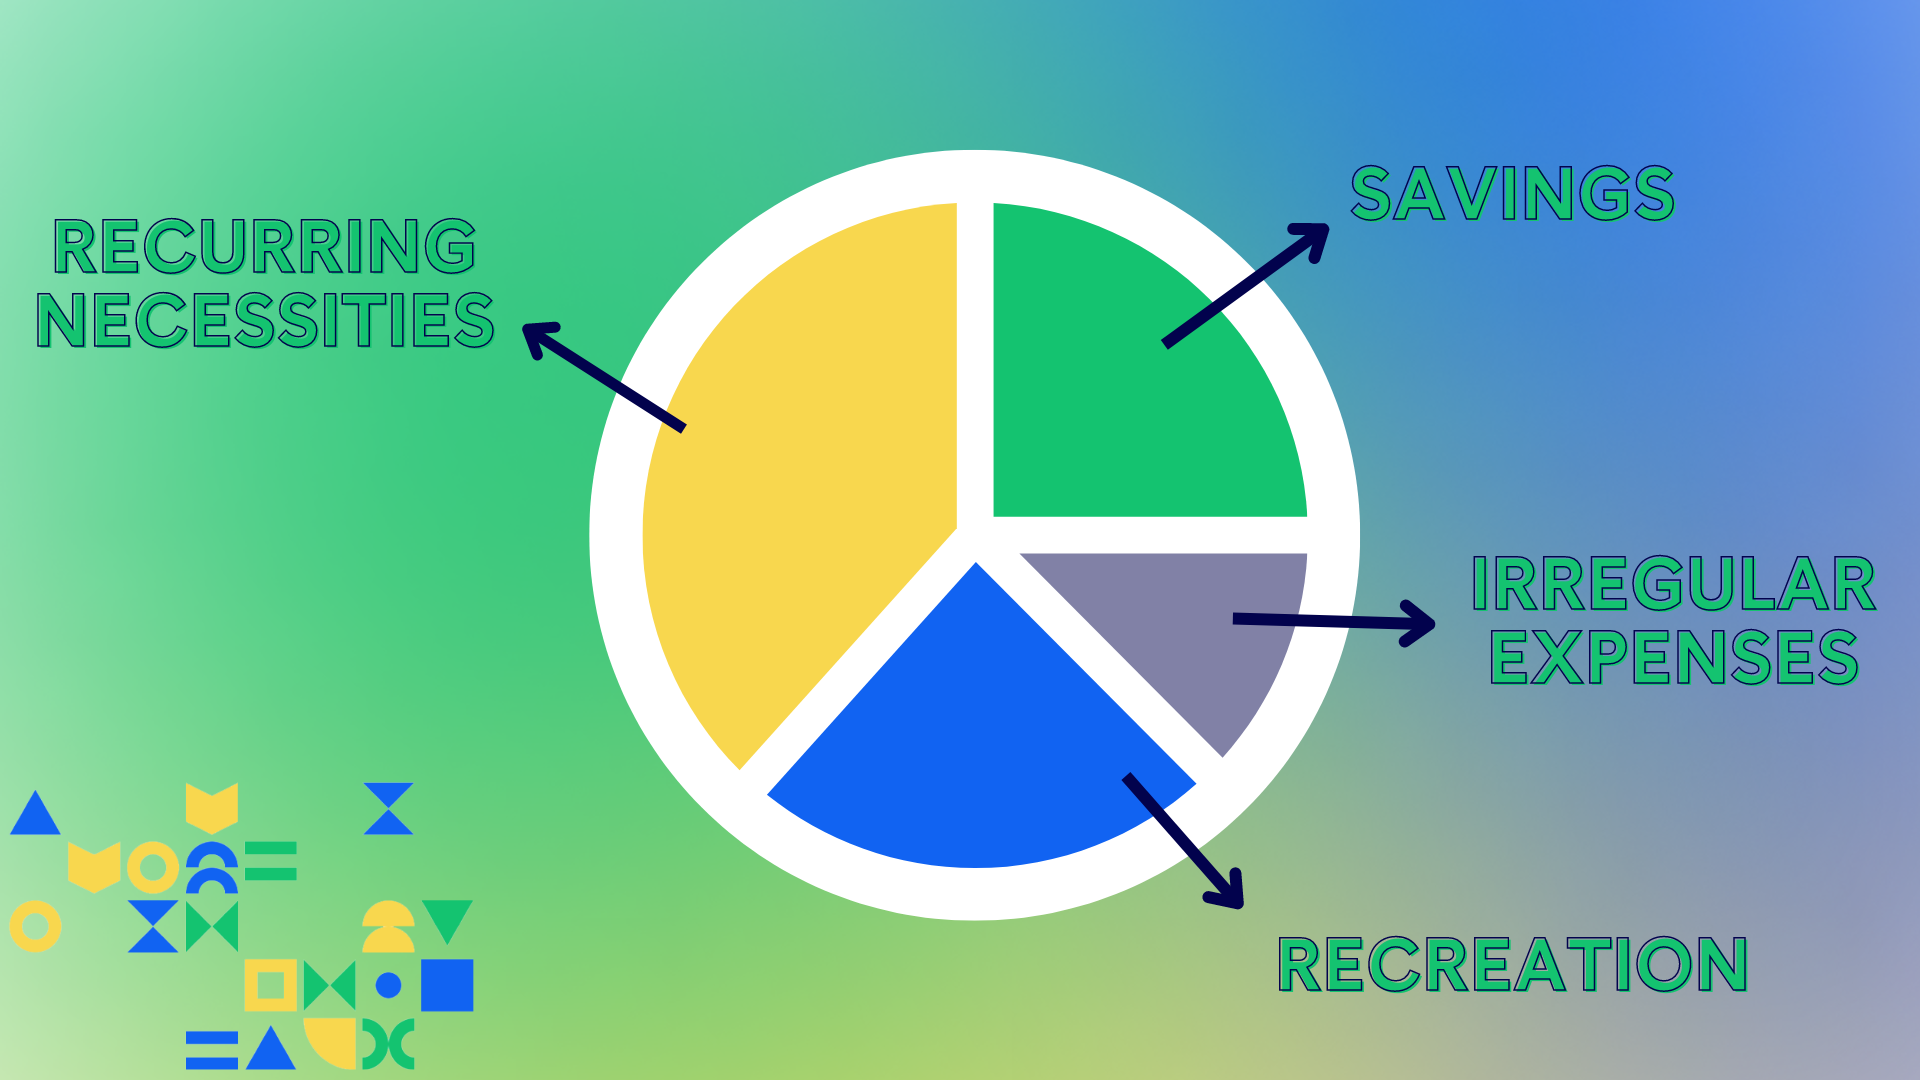 Image of a pie chart representing a budget with four categories: recurring necessities, savings, irregular expenses, and recreation.